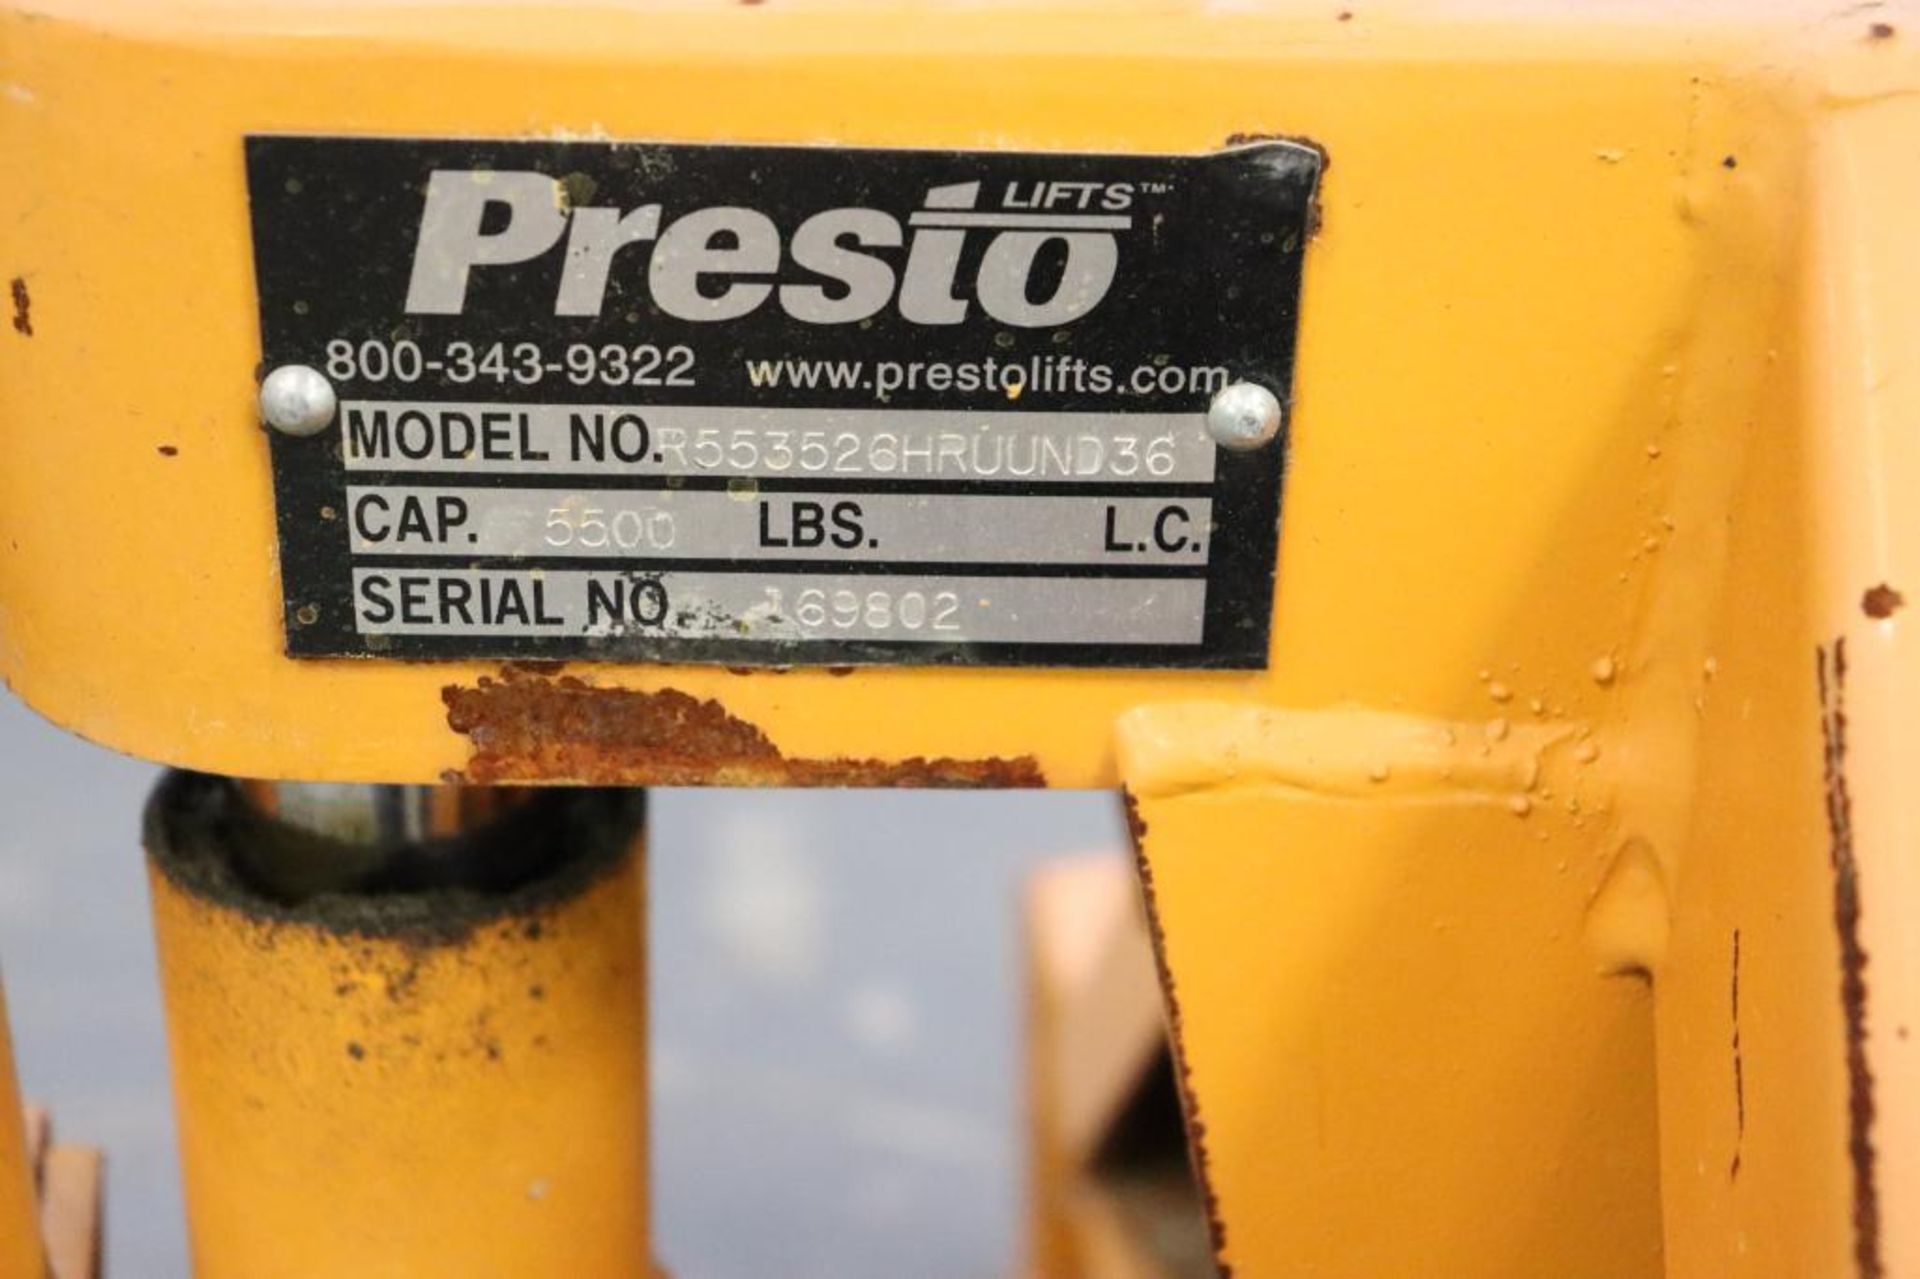 Presto 5500lbs roll moving pallet jack - Image 5 of 8